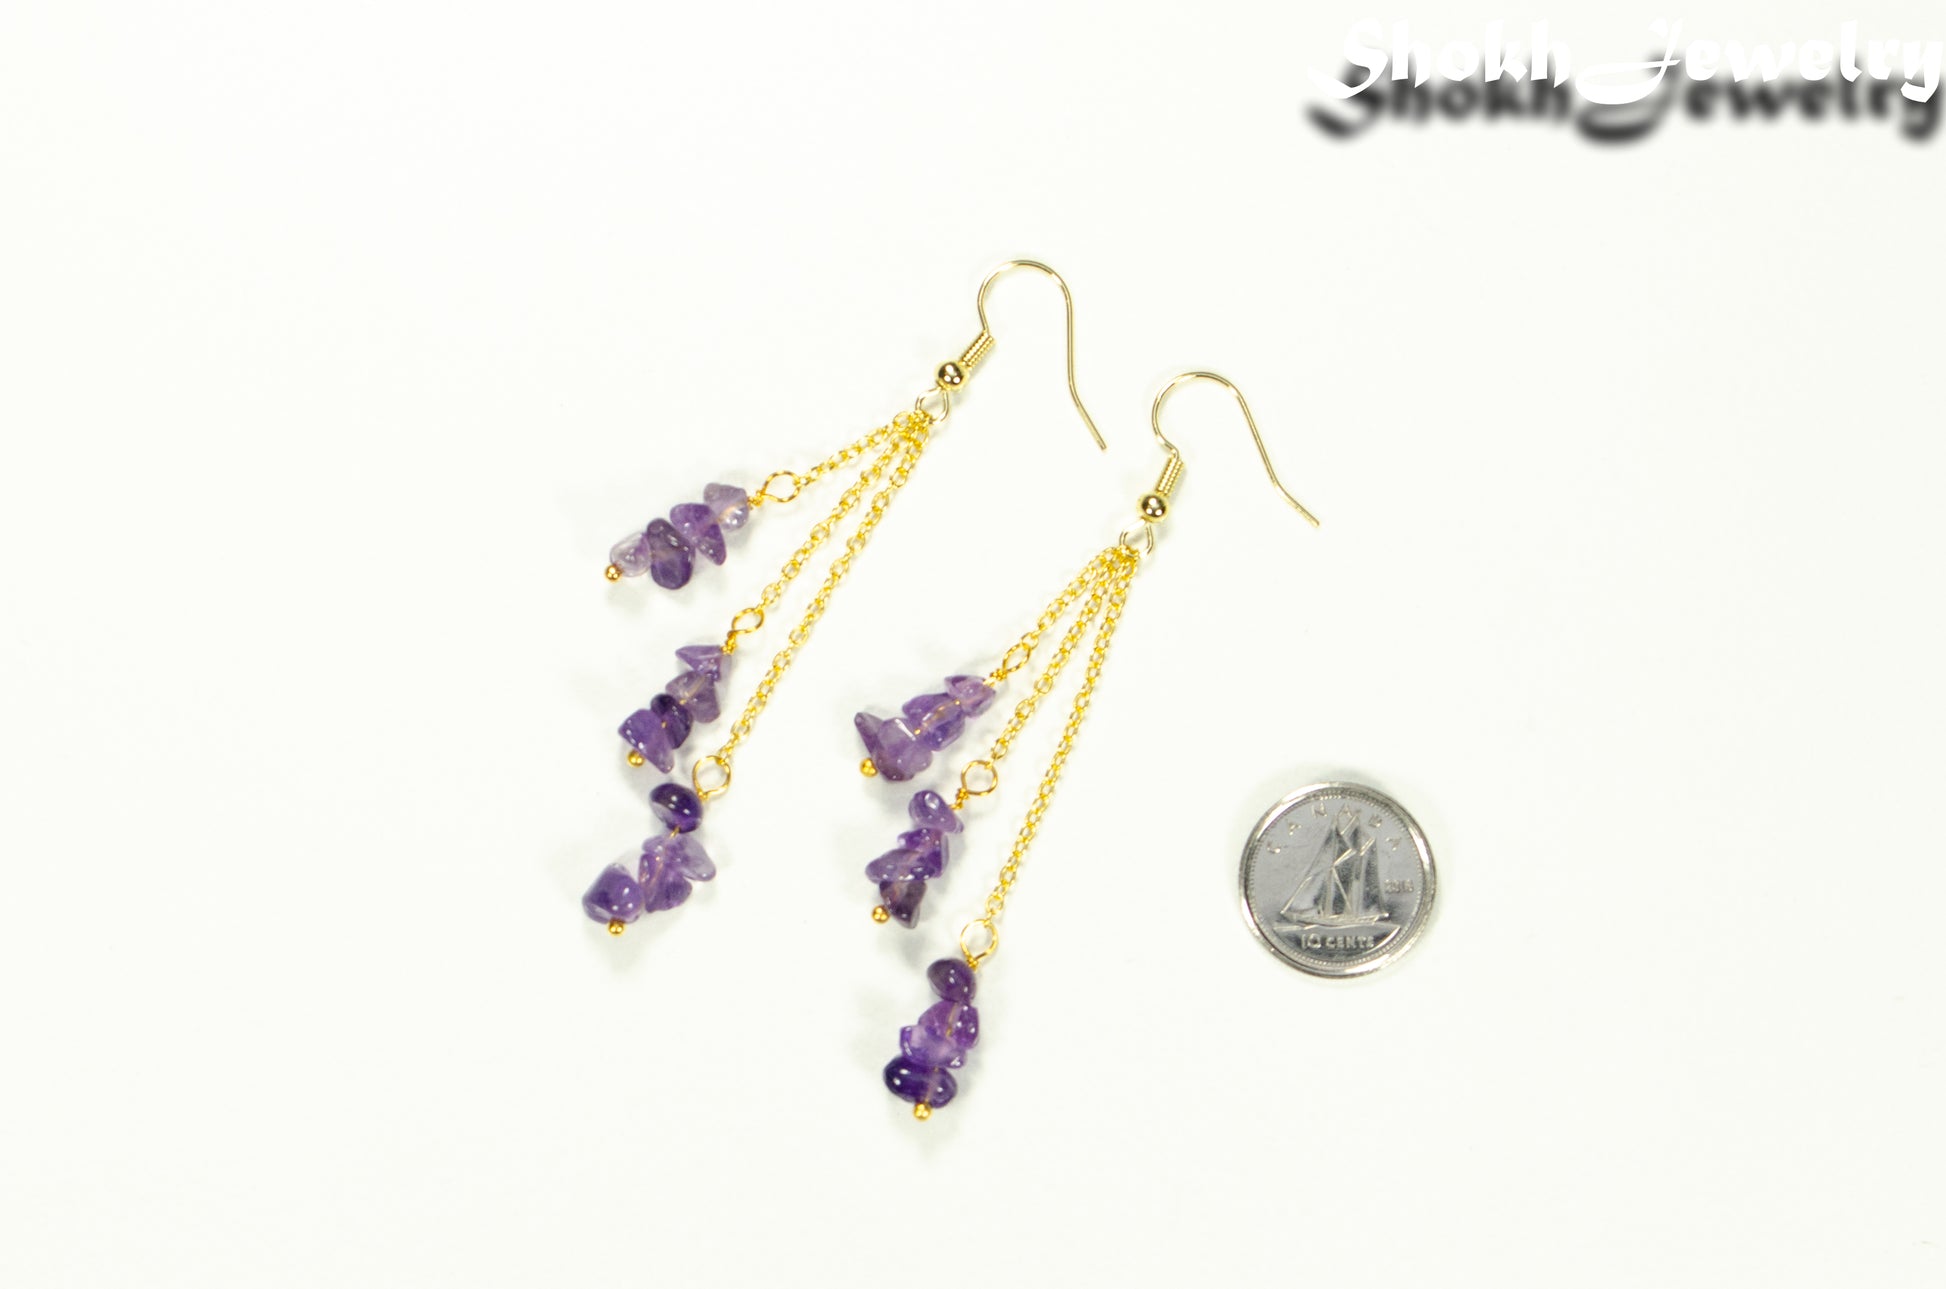 Long Gold Plated Chain and Amethyst Crystal Chip Earrings beside a dime.